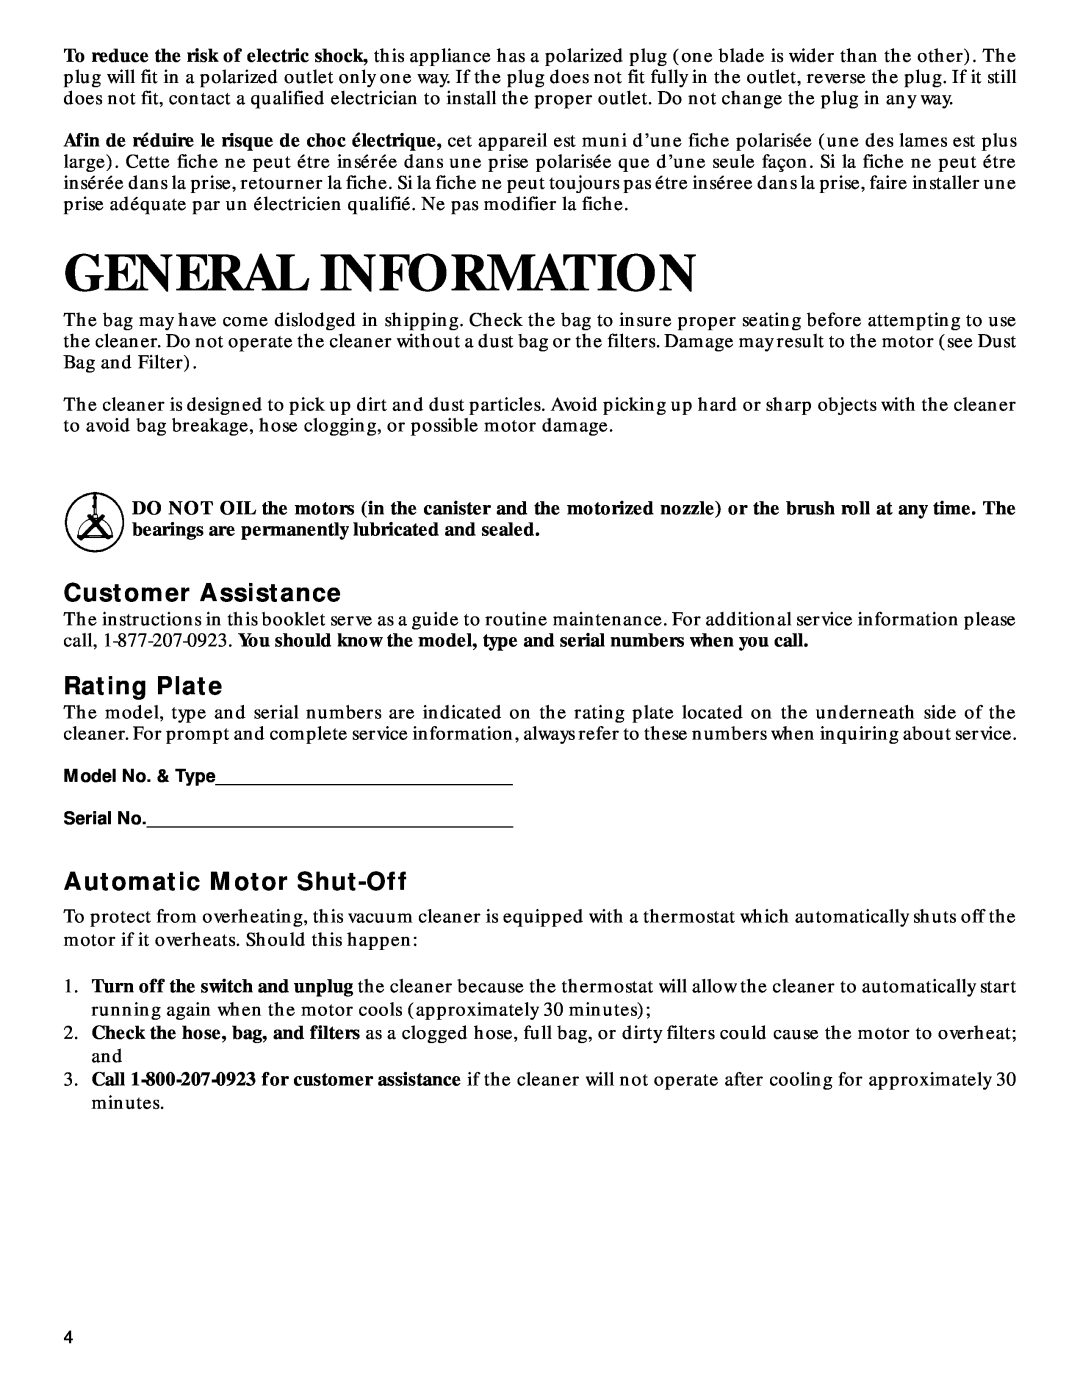 GE 106766, 71937 warranty General Information, Customer Assistance, Rating Plate, Automatic Motor Shut-Off 